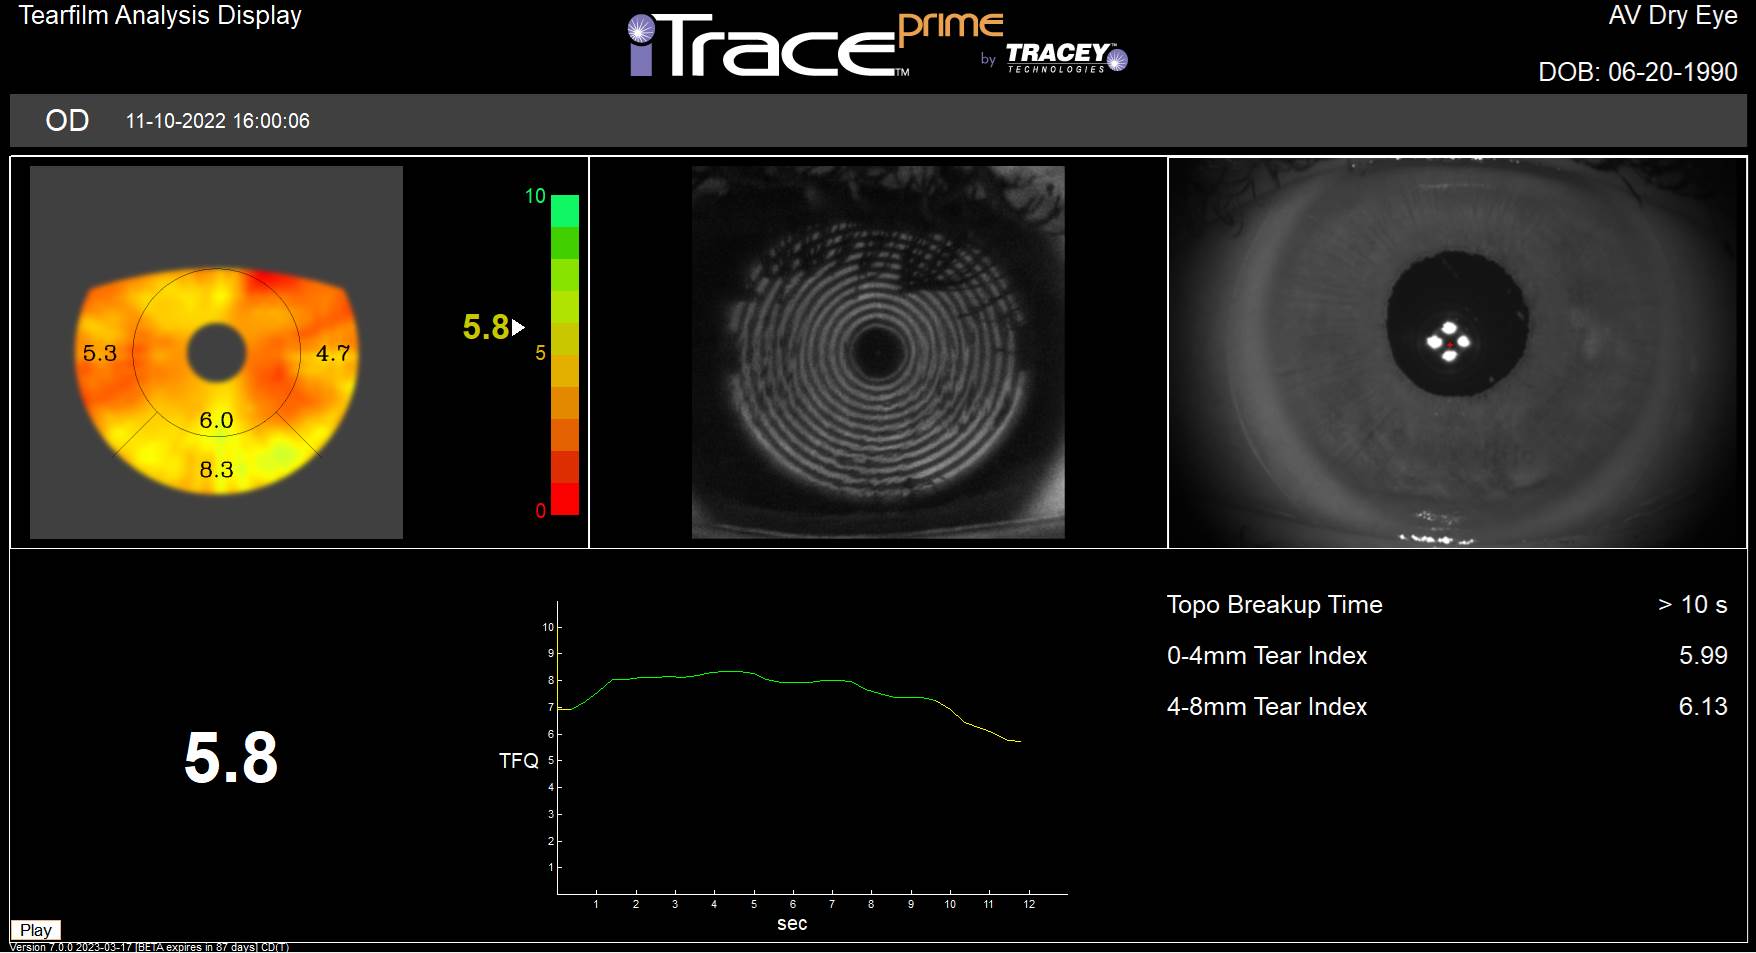 iTrace Dysfunctional Lens Patient Display